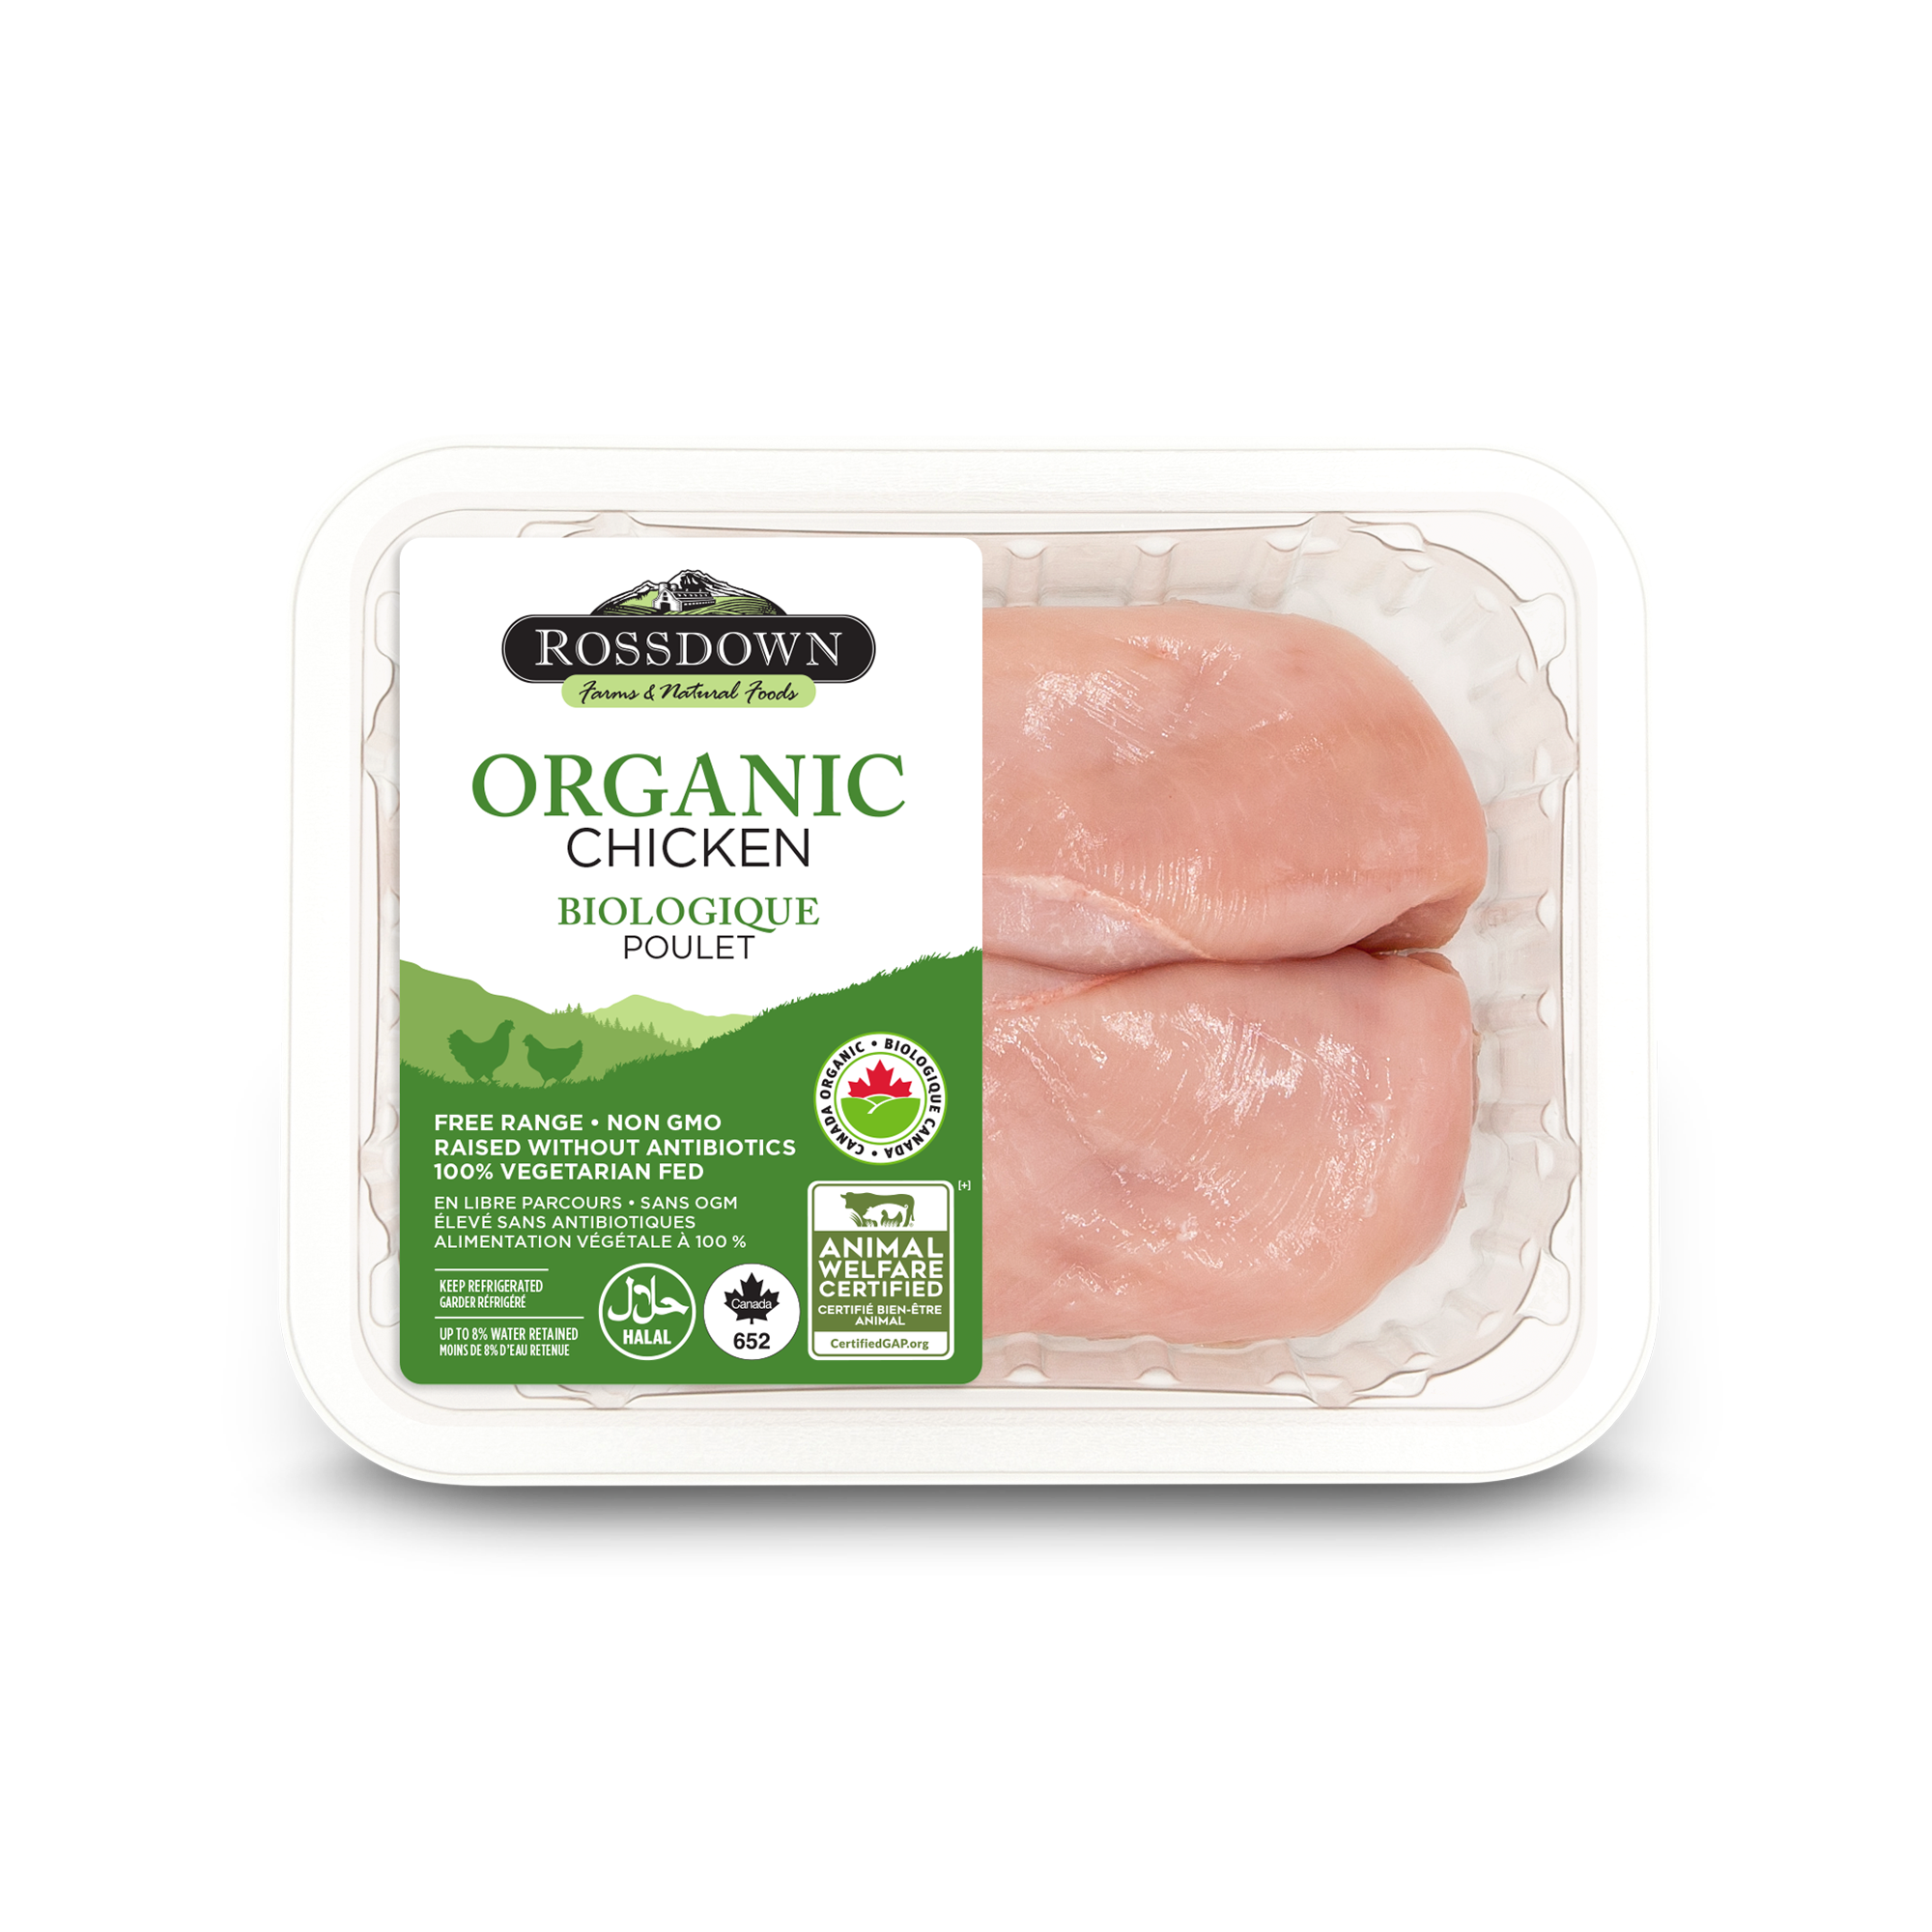 Chicken Products Organic and Raised Without Antibiotics